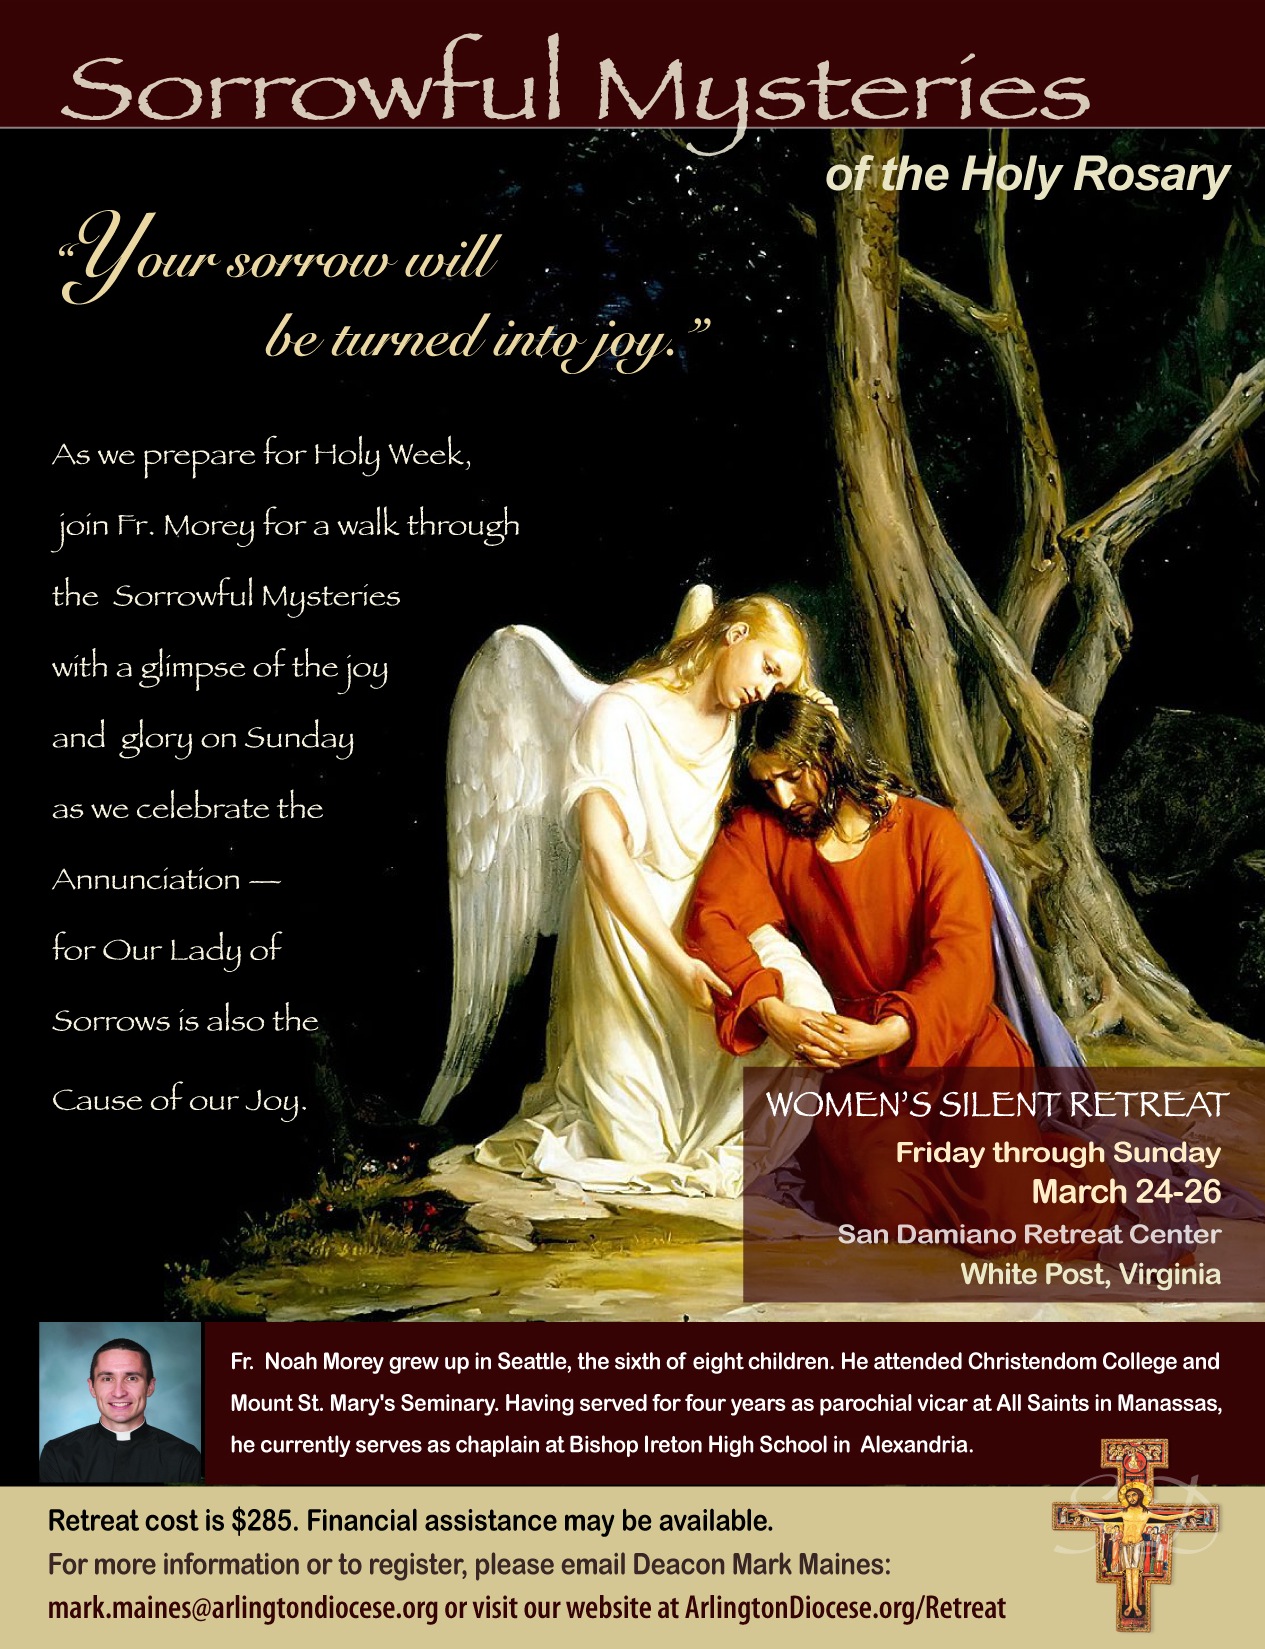 Sorrowful Mysteries of the Holy Rosary retreat flyer jpg